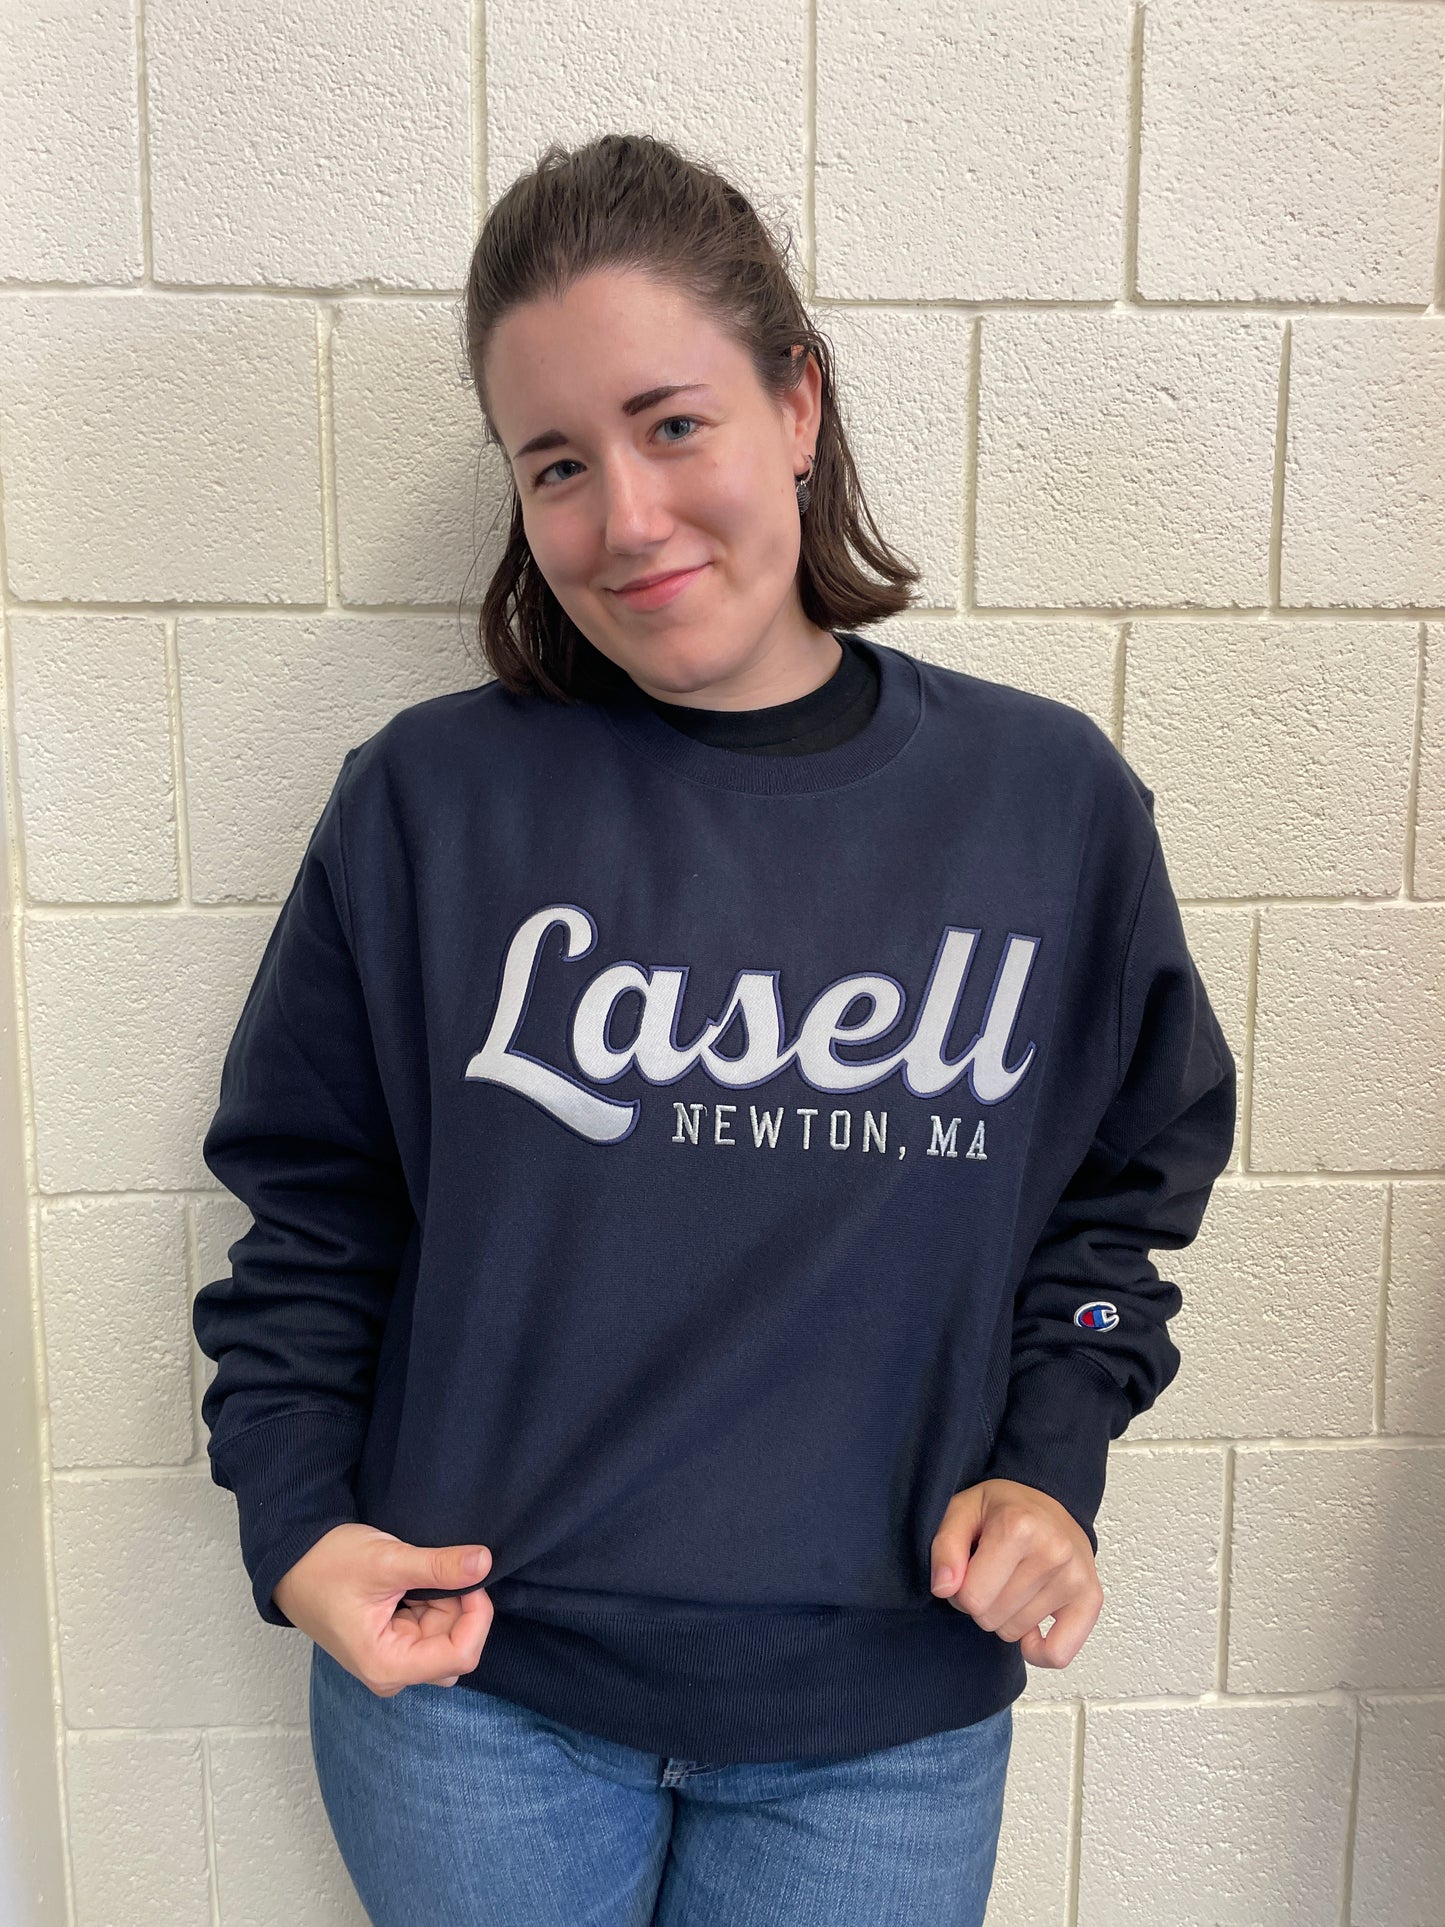 Lasell Newton MA - Navy & Silver Embroidery